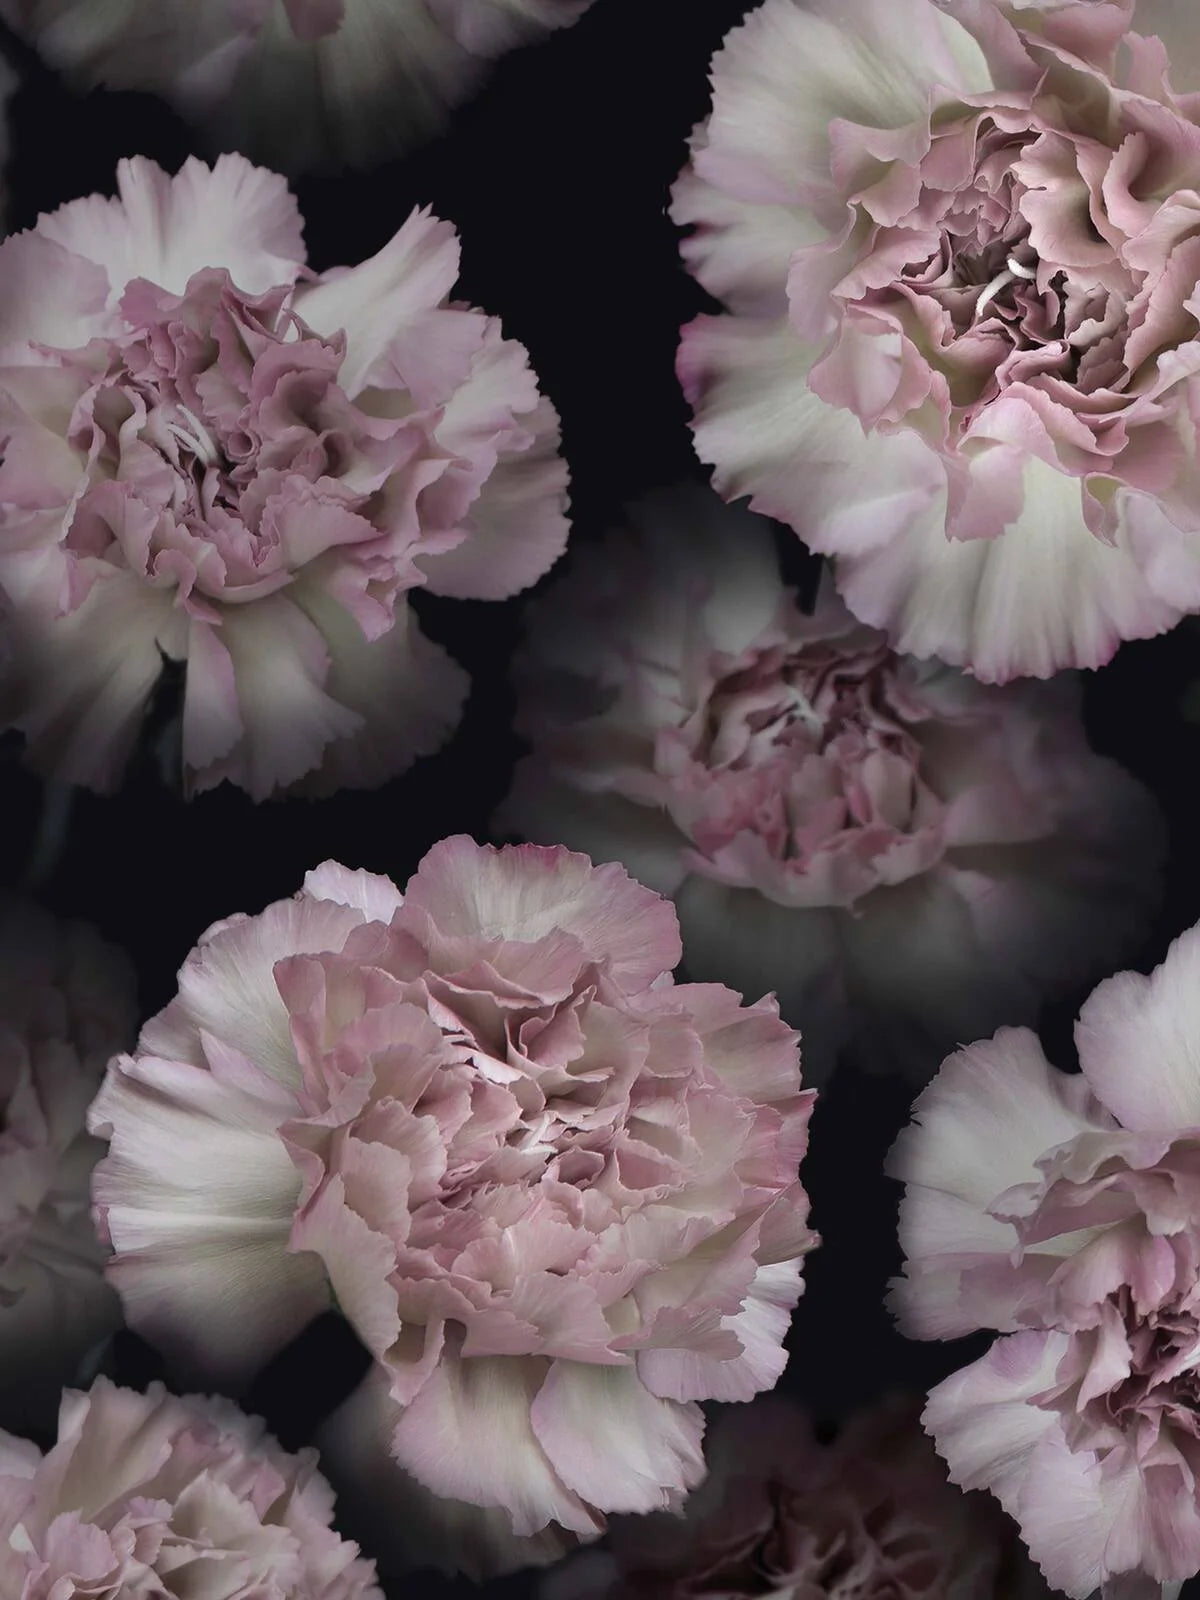 Coronation Marie is a stunning floral wallpaper that features pink carnations in muted tones